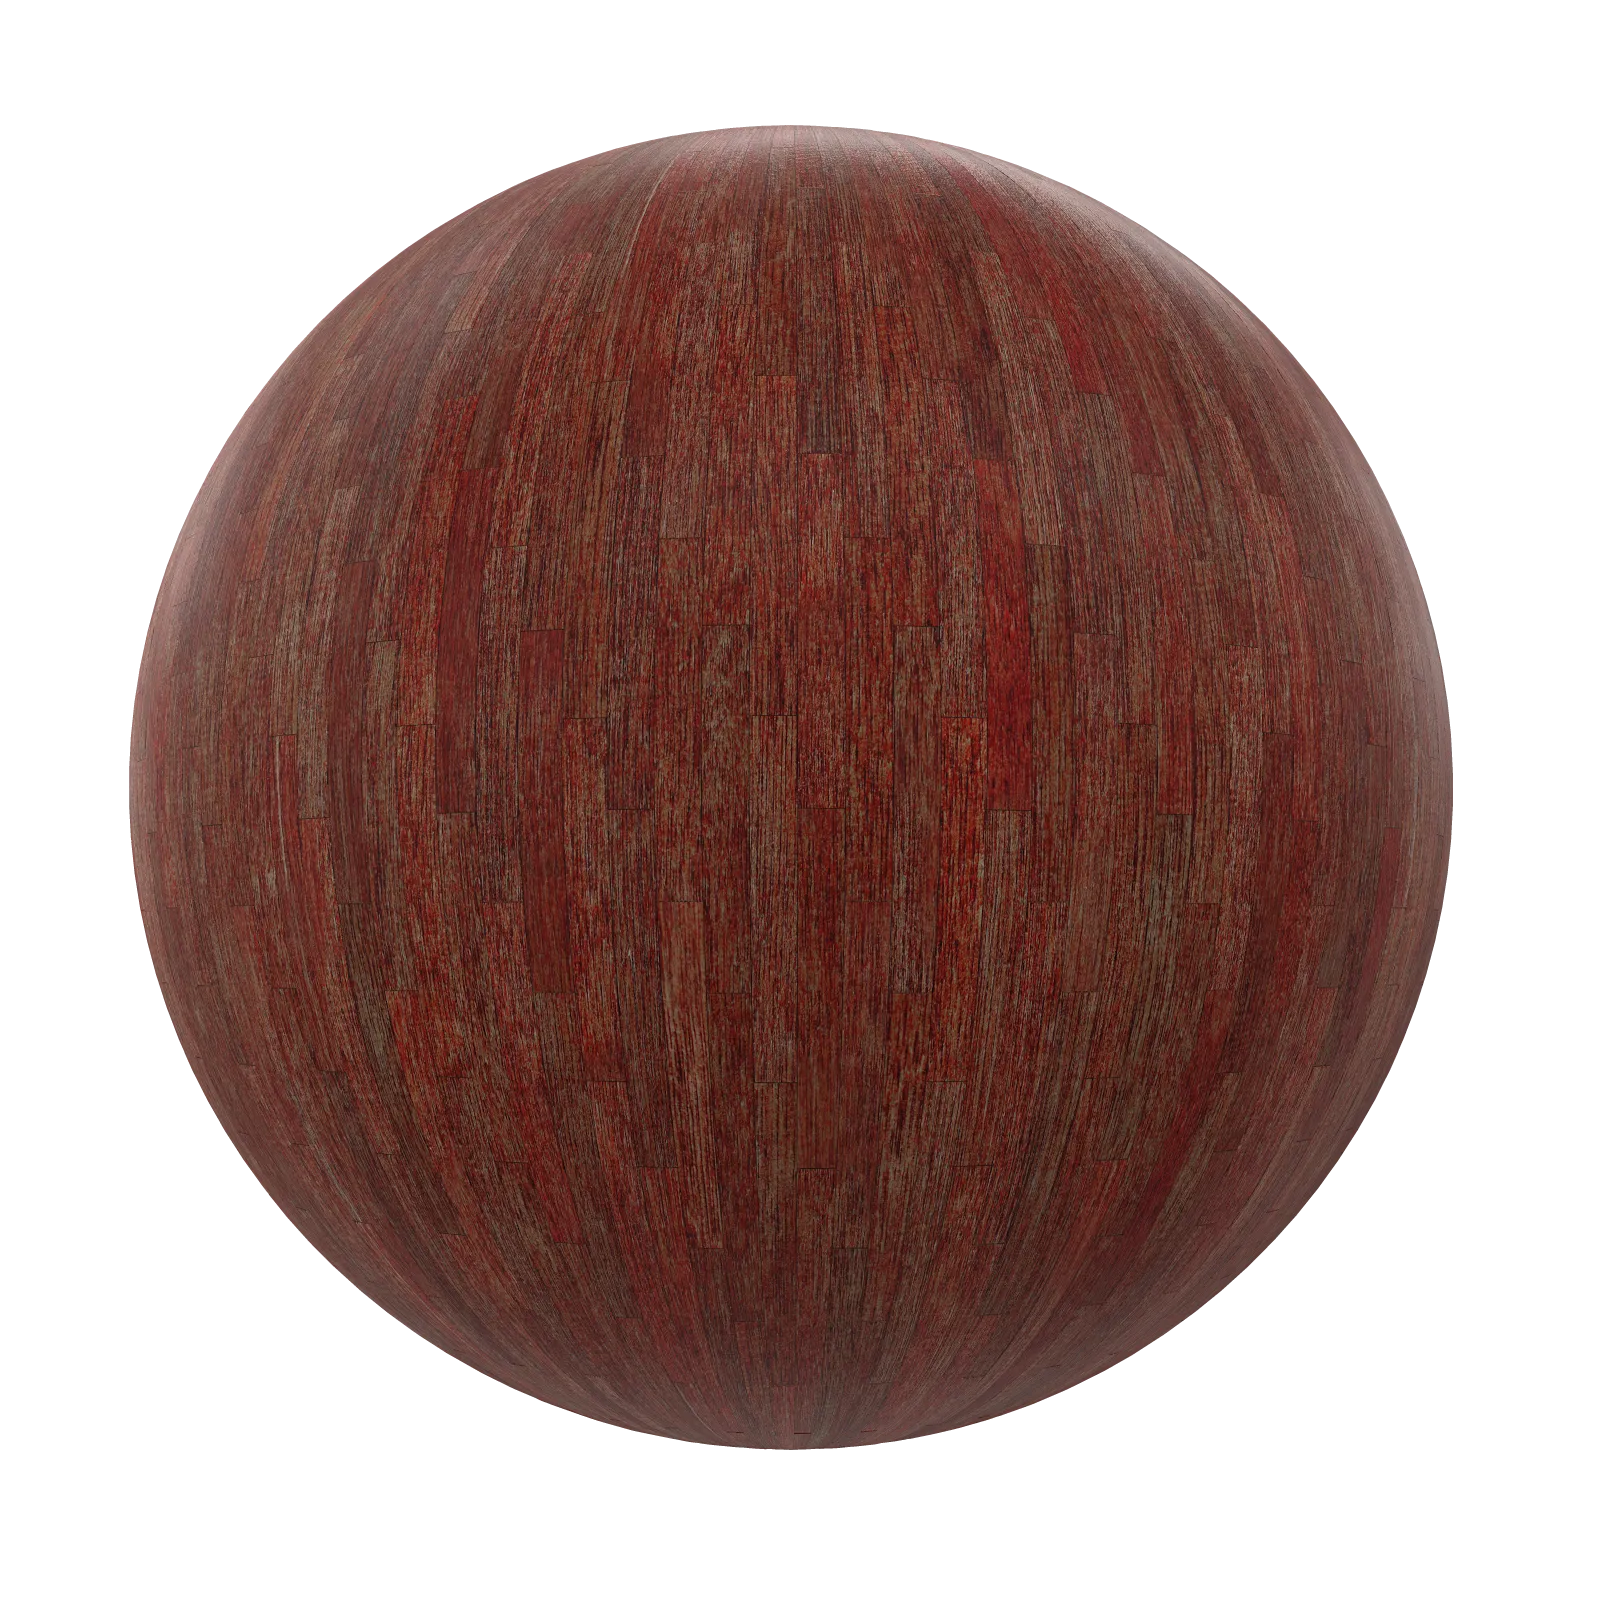 TEXTURES – WOOD – Old Wood Tiles 12